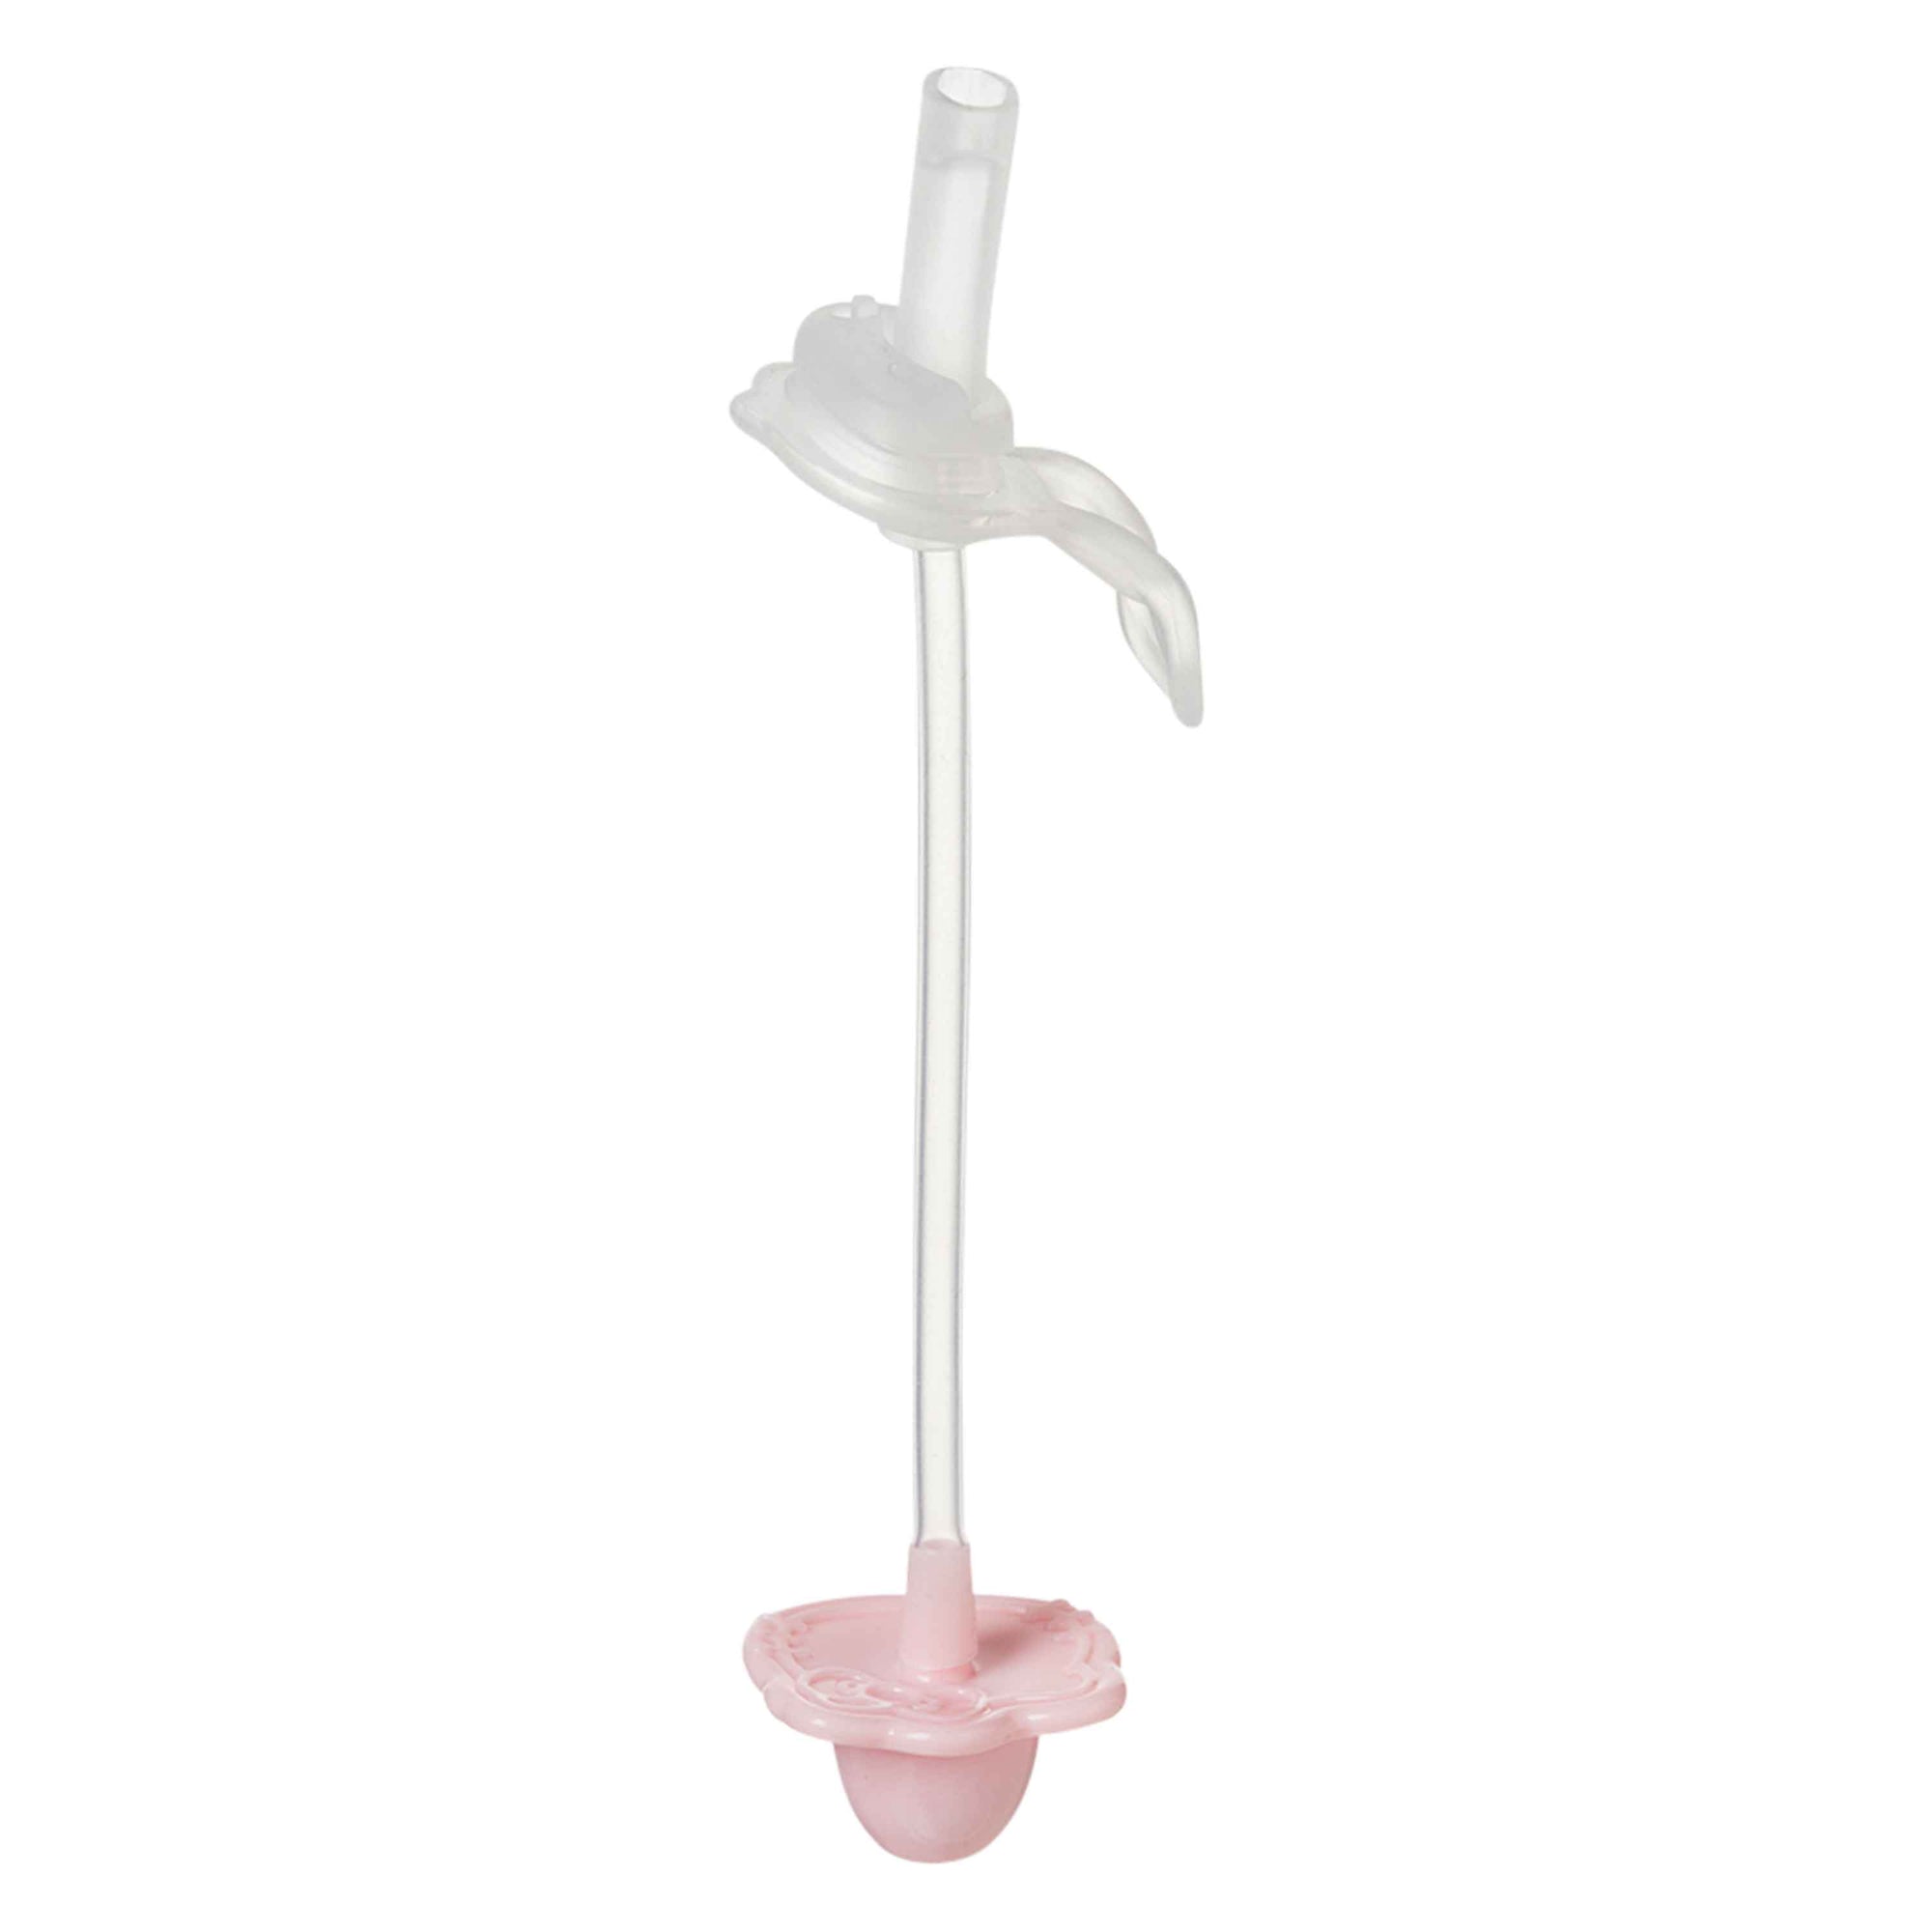 b.box Sippy Cup Replacement Straws and Cleaner